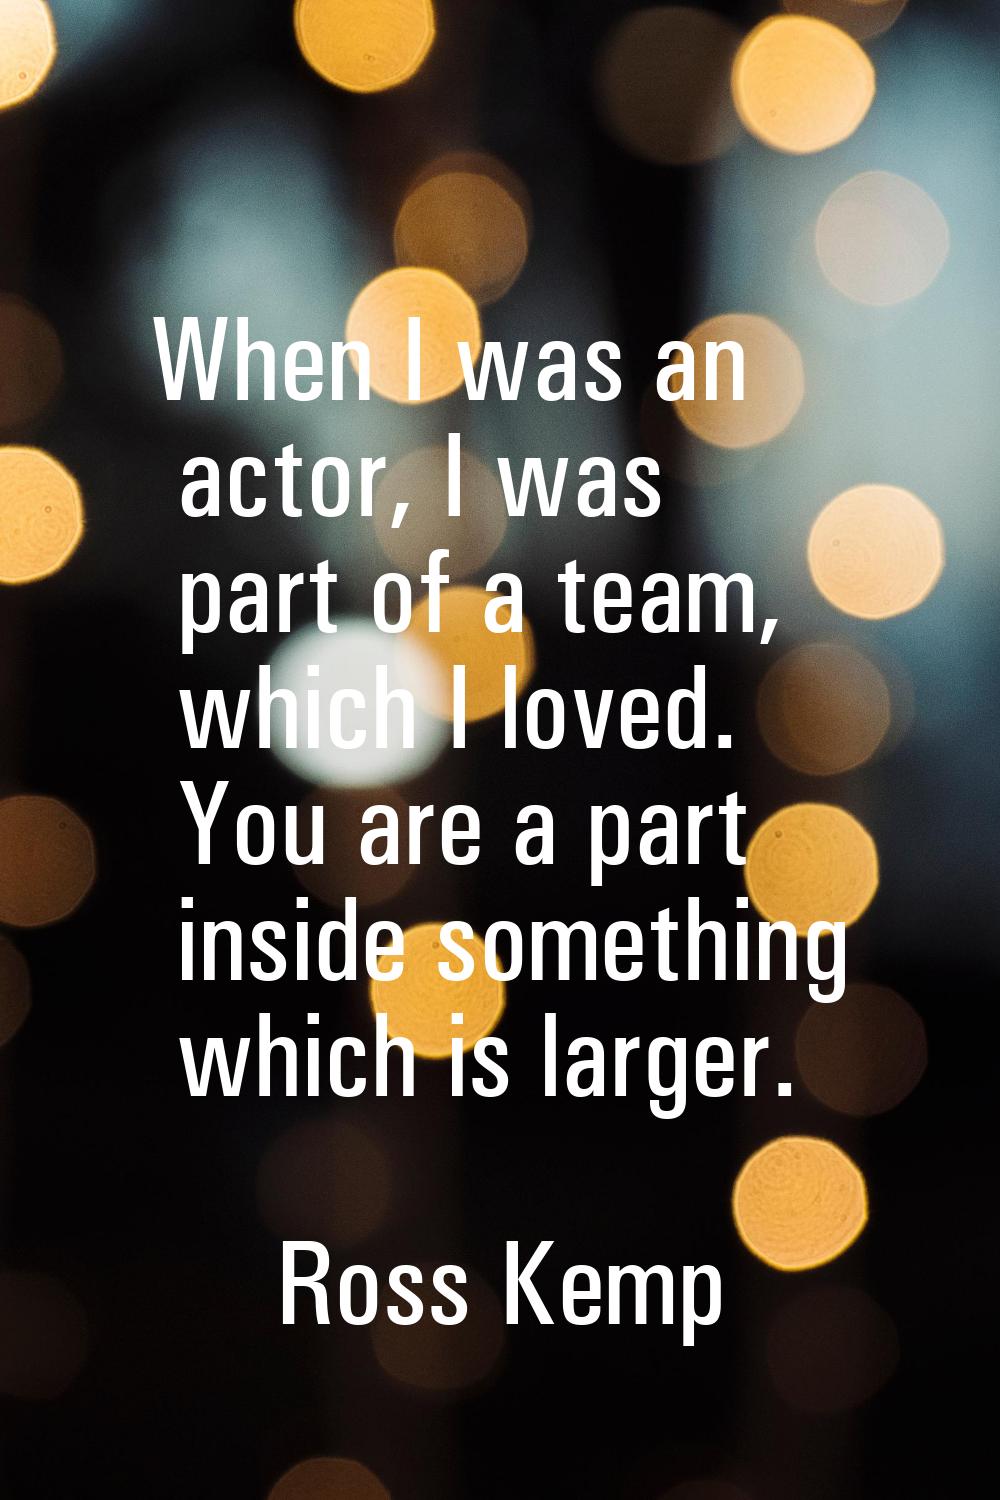 When I was an actor, I was part of a team, which I loved. You are a part inside something which is 